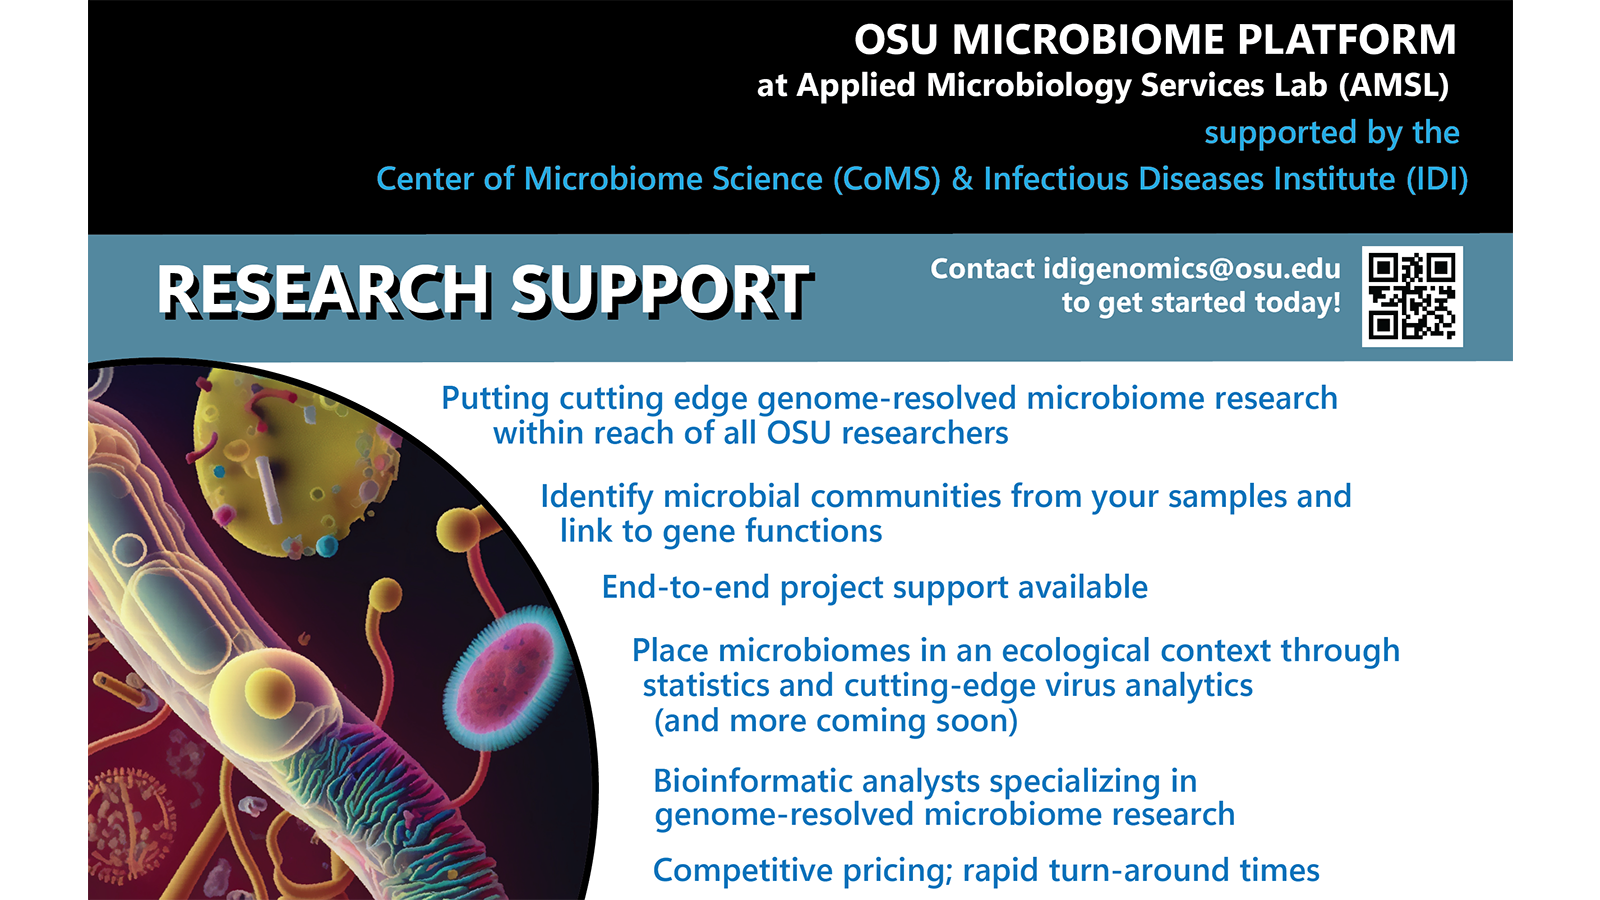 Microbiome Platform research support